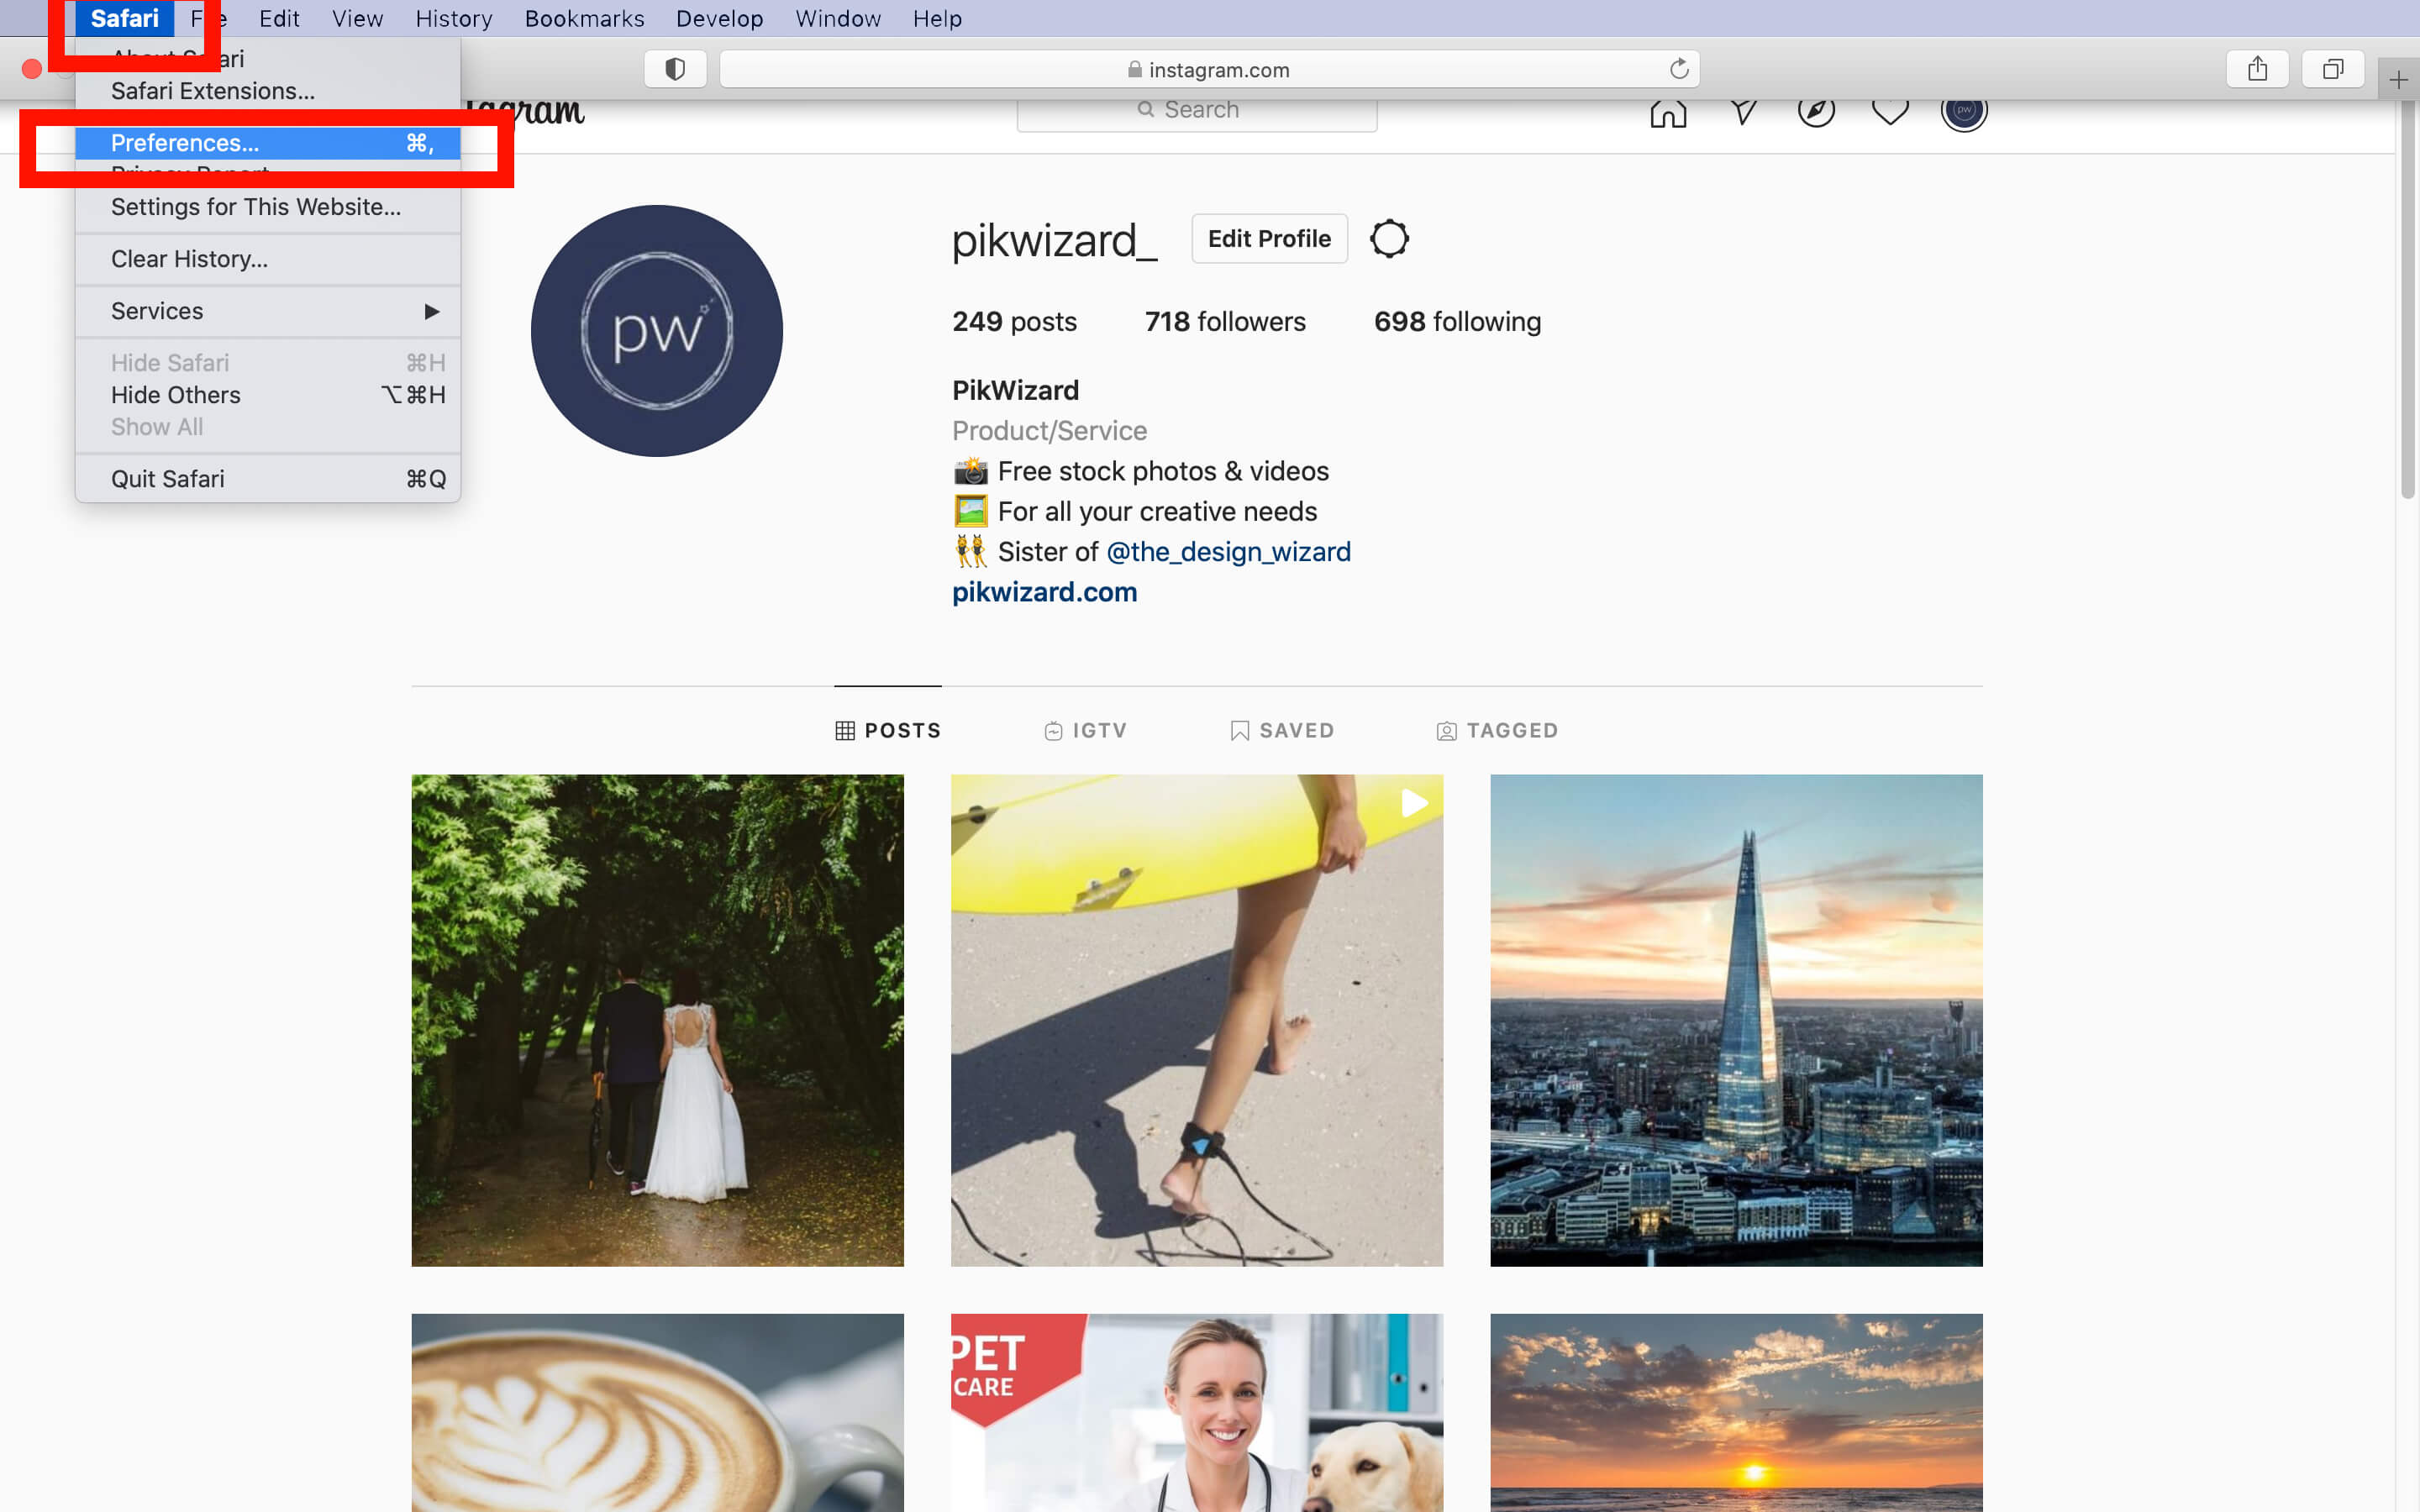 Safari tab and drop down menu displaying 'Preferences', both highlighted in red - A complete beginner's guide on how to post on Instagram from a PC or Mac - Image